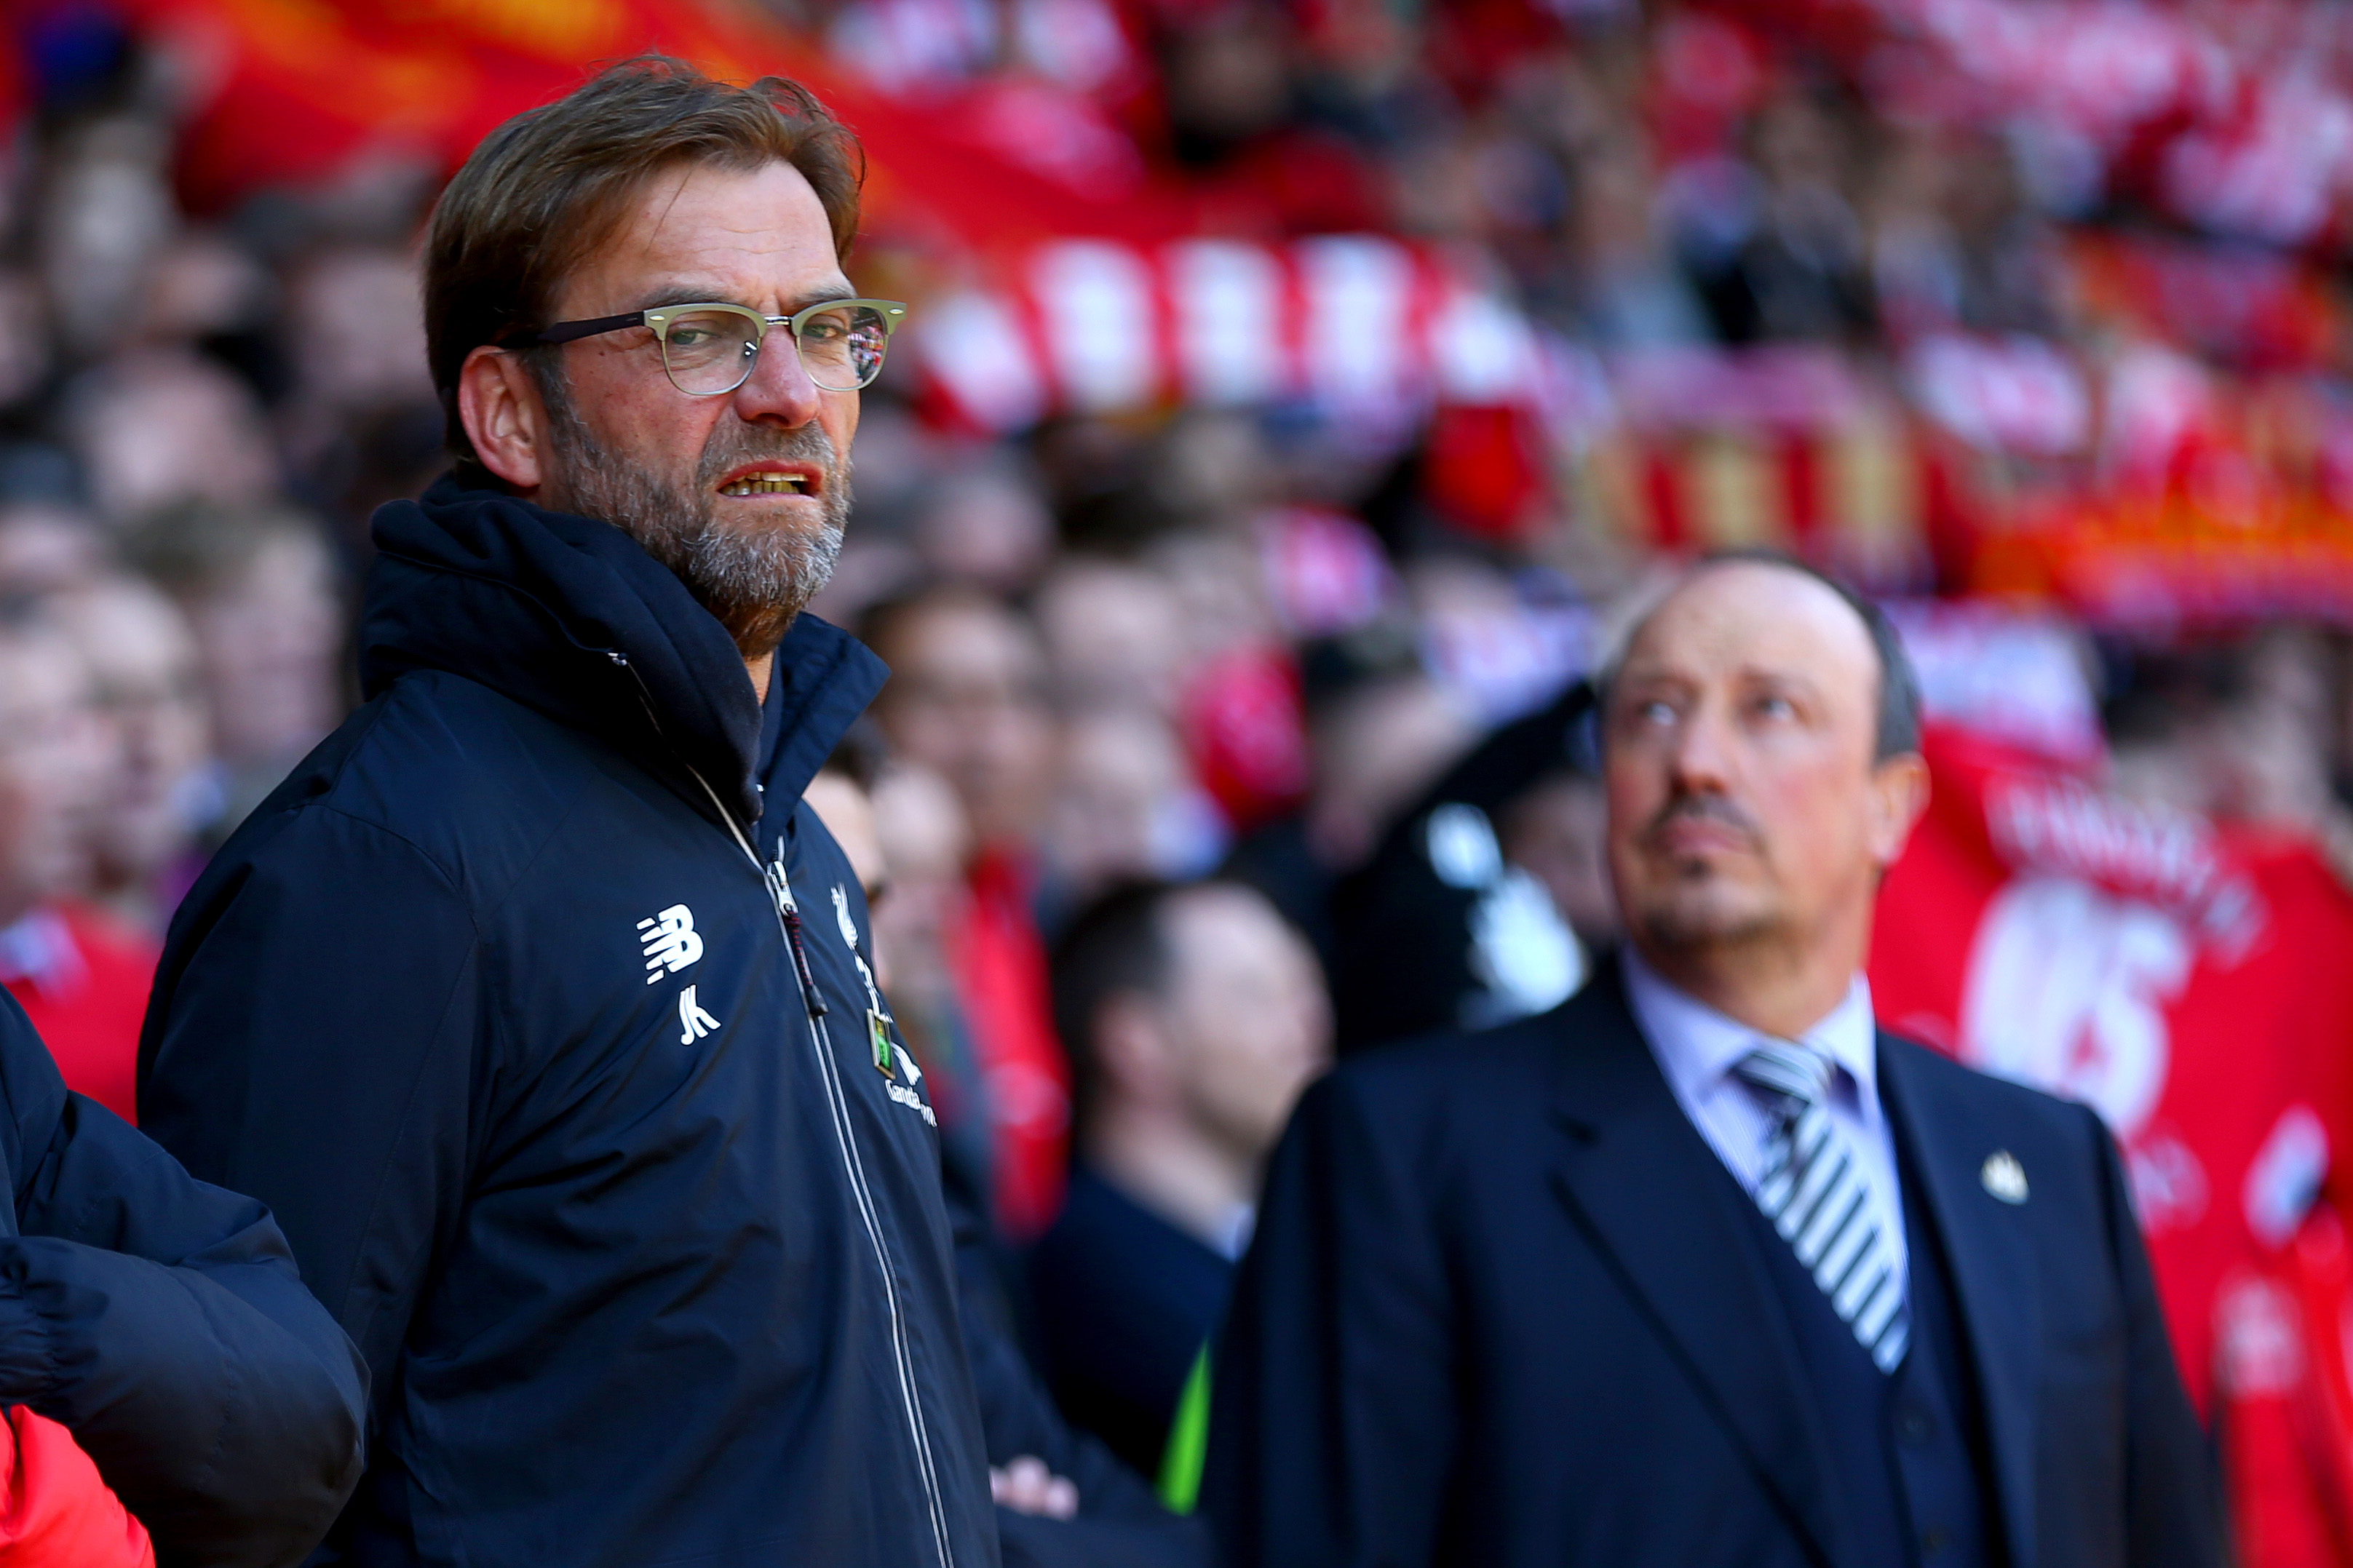 LIVERPOOL, ENGLAND - APRIL 23:  Jurgen Klopp, manager of Liverpool iand Rafa Benitez, Manager of Newcastle United look on during the Barclays Premier League match between Liverpool and Newcastle United at Anfield on April 23, 2016 in Liverpool, United Kingdom.  (Photo by Clive Brunskill/Getty Images)